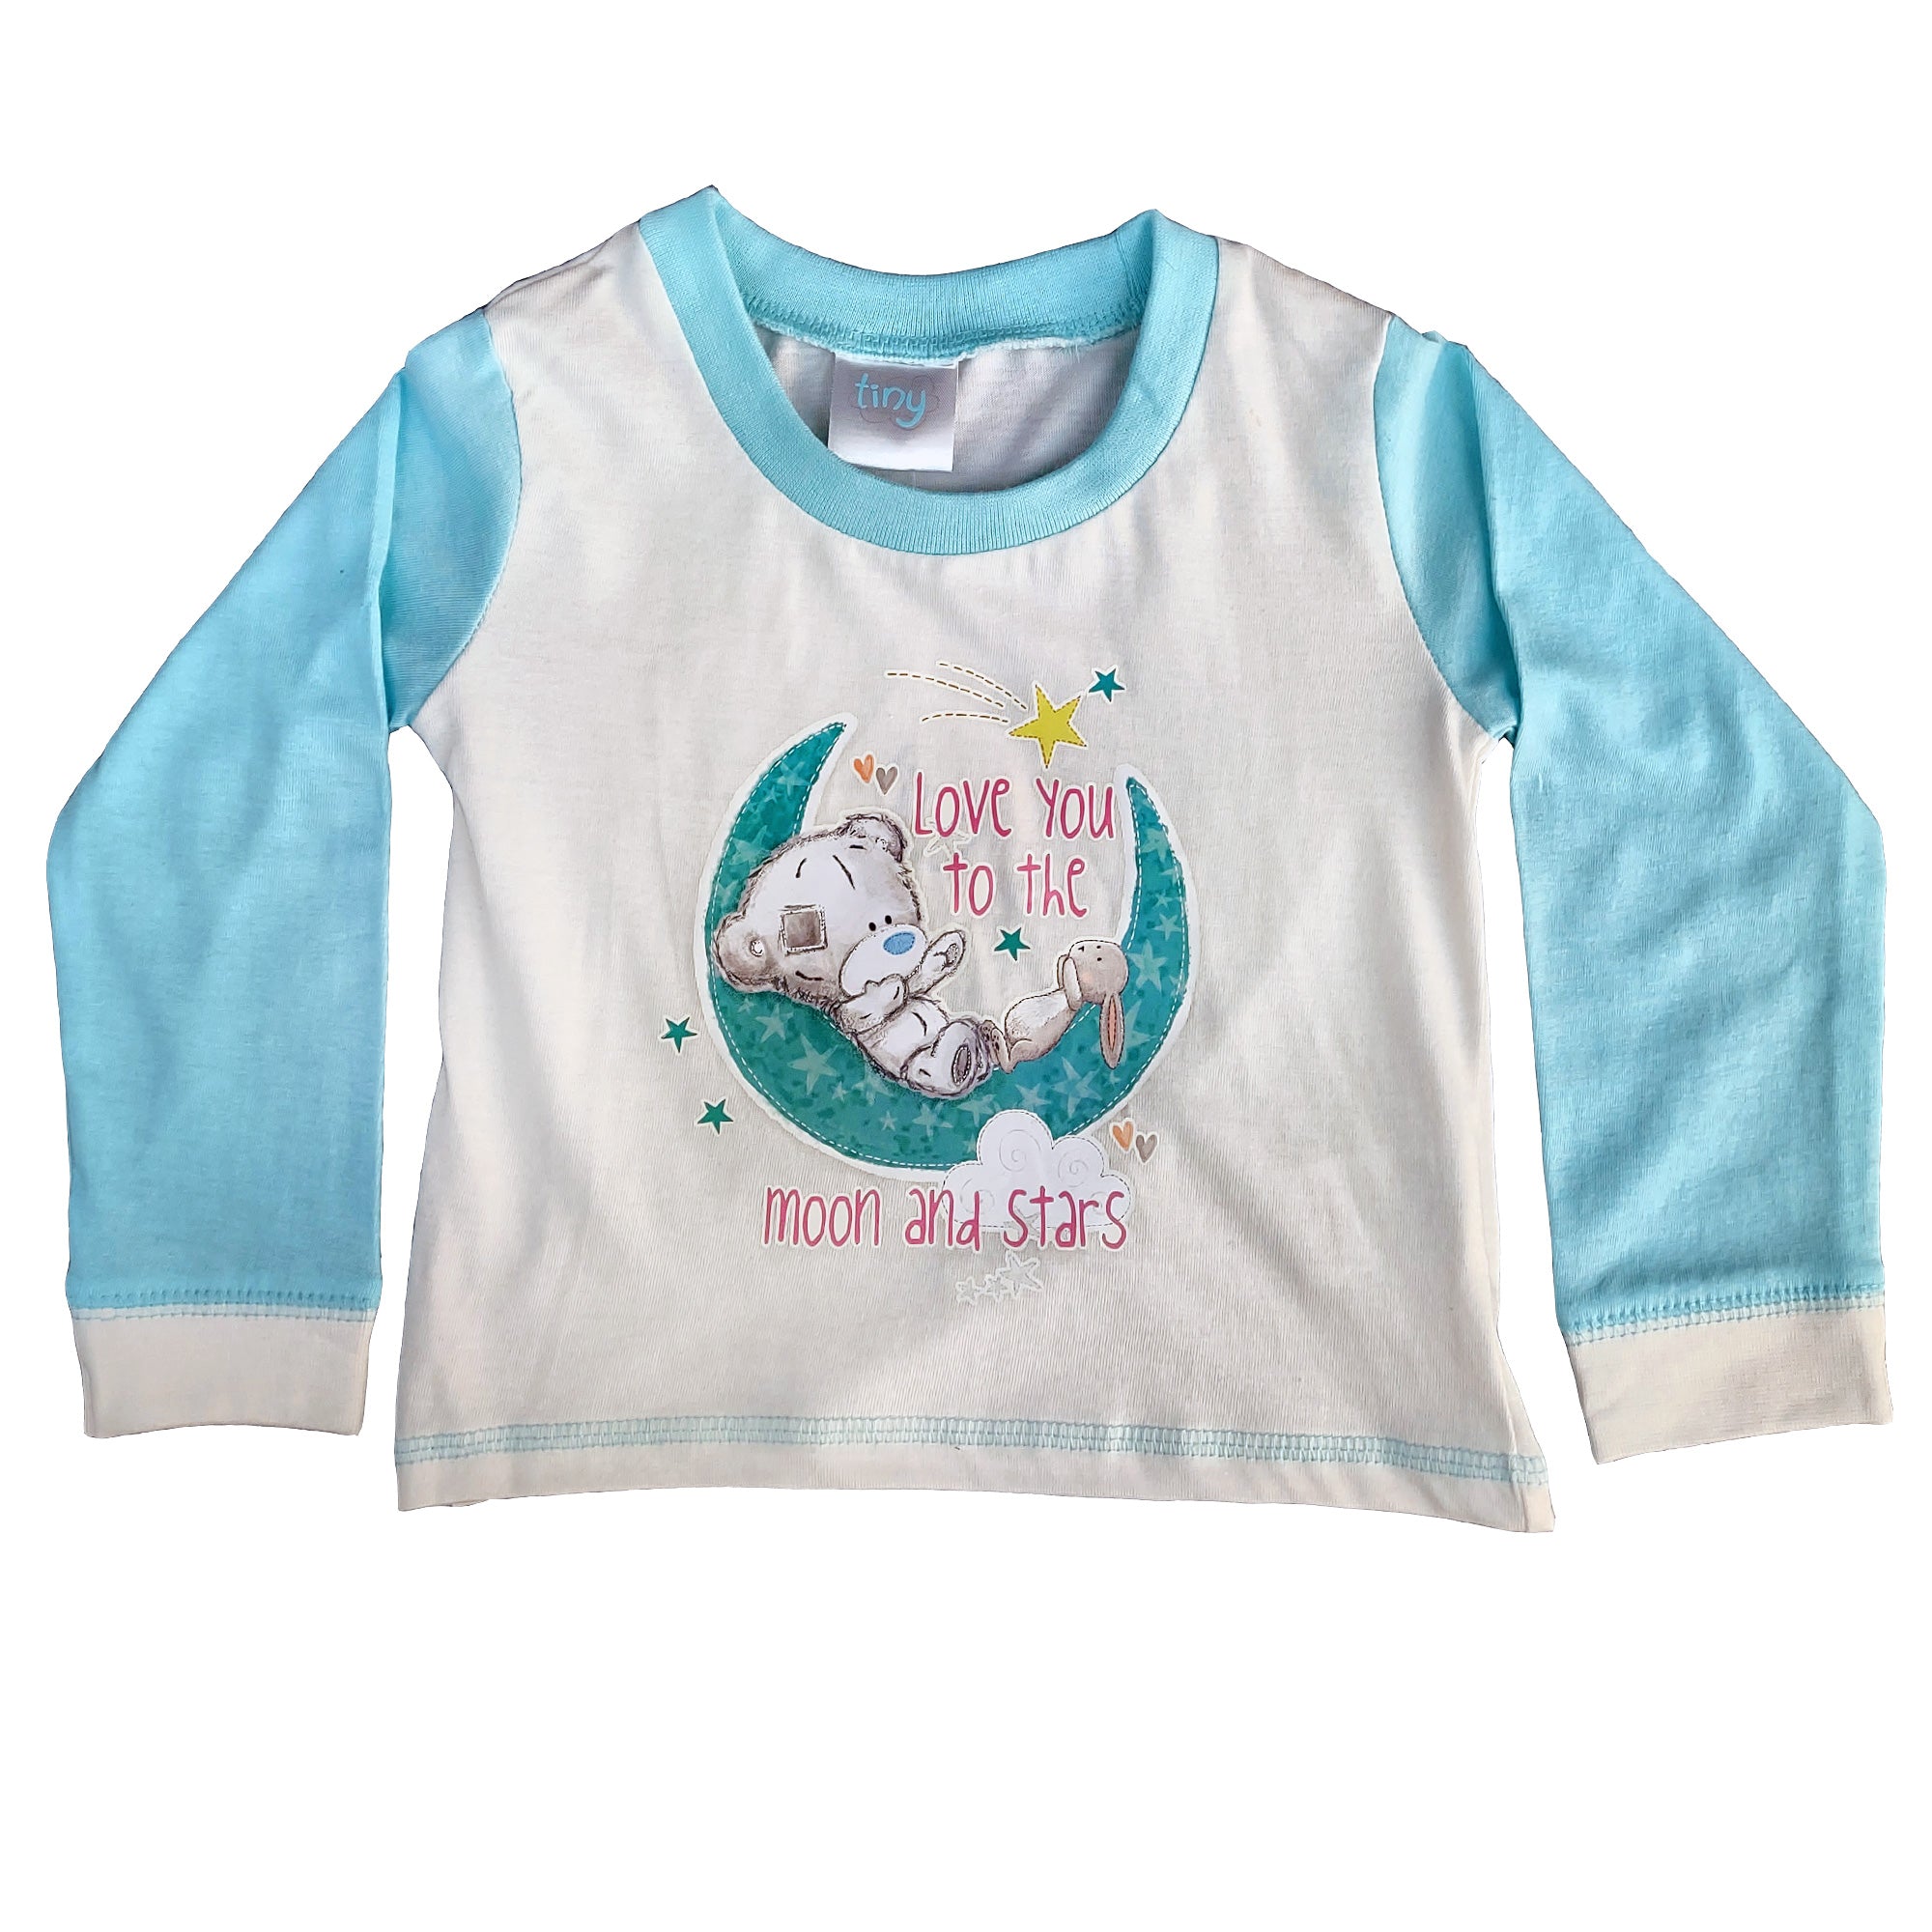 Tatty Teddy Baby Pyjamas - Love You To The Moon - 2 Piece Set- Sizes 6-24 Months top